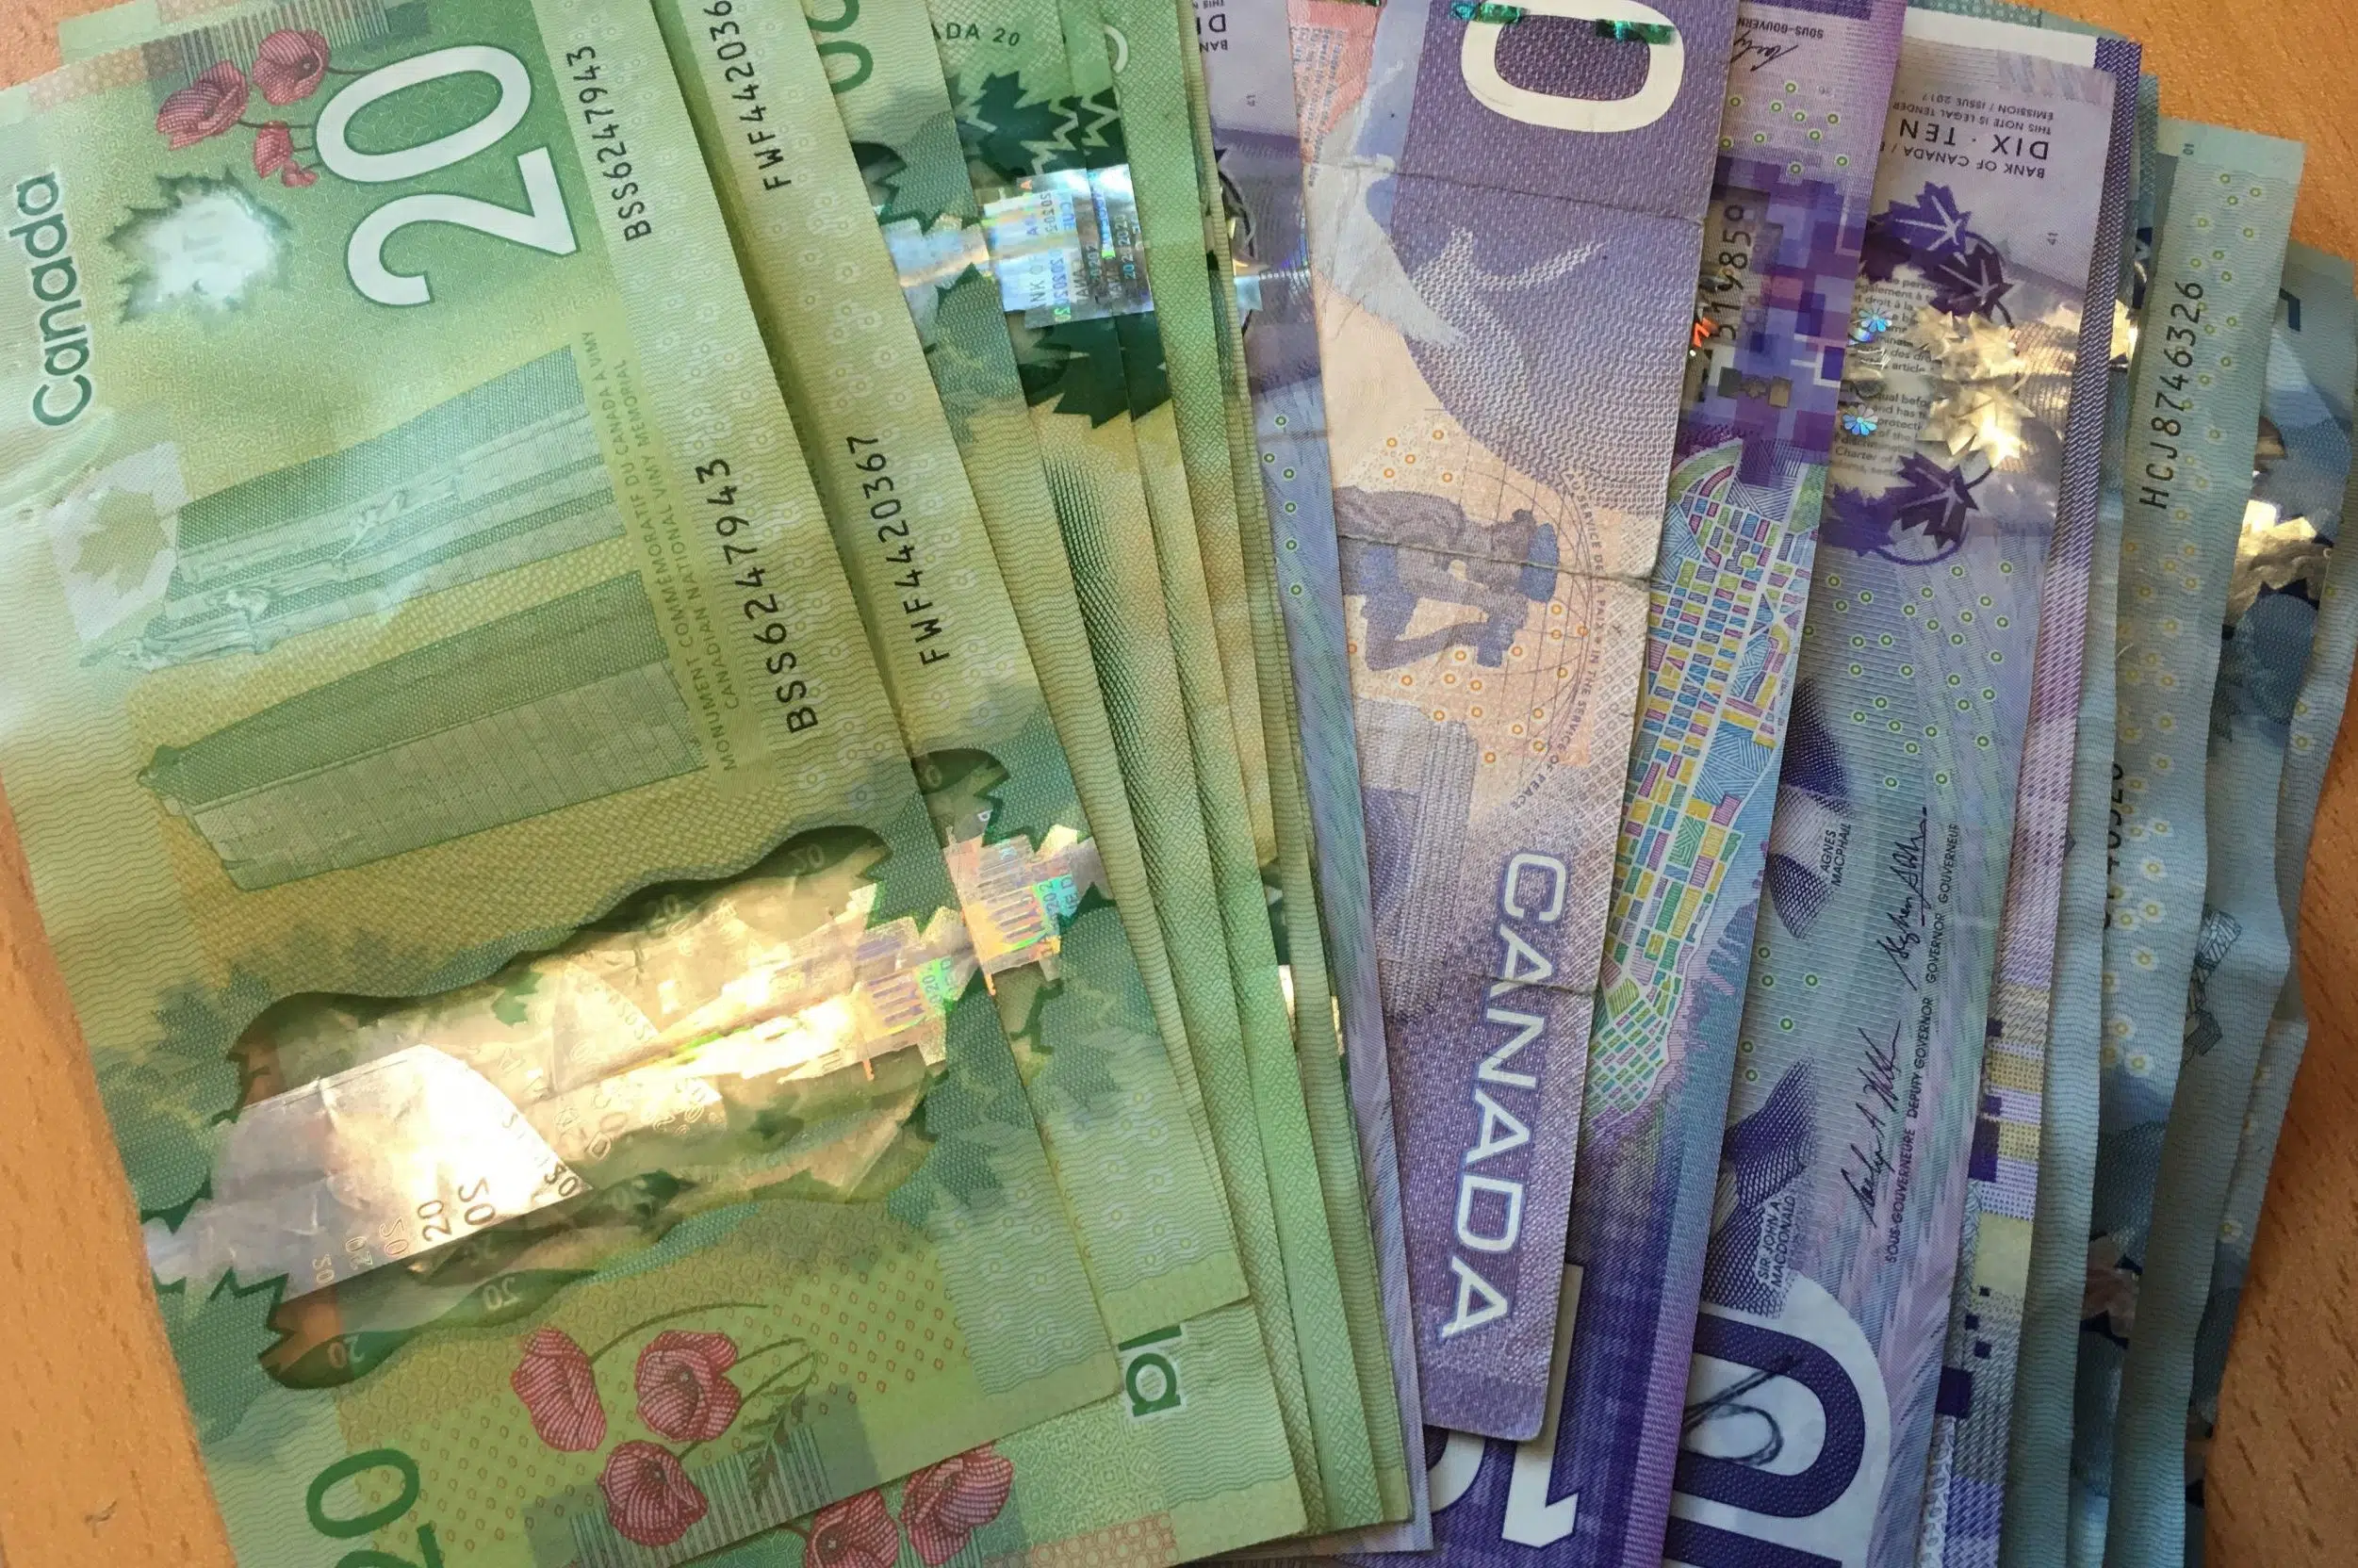 Analyst explains falling inflation rate in Canada